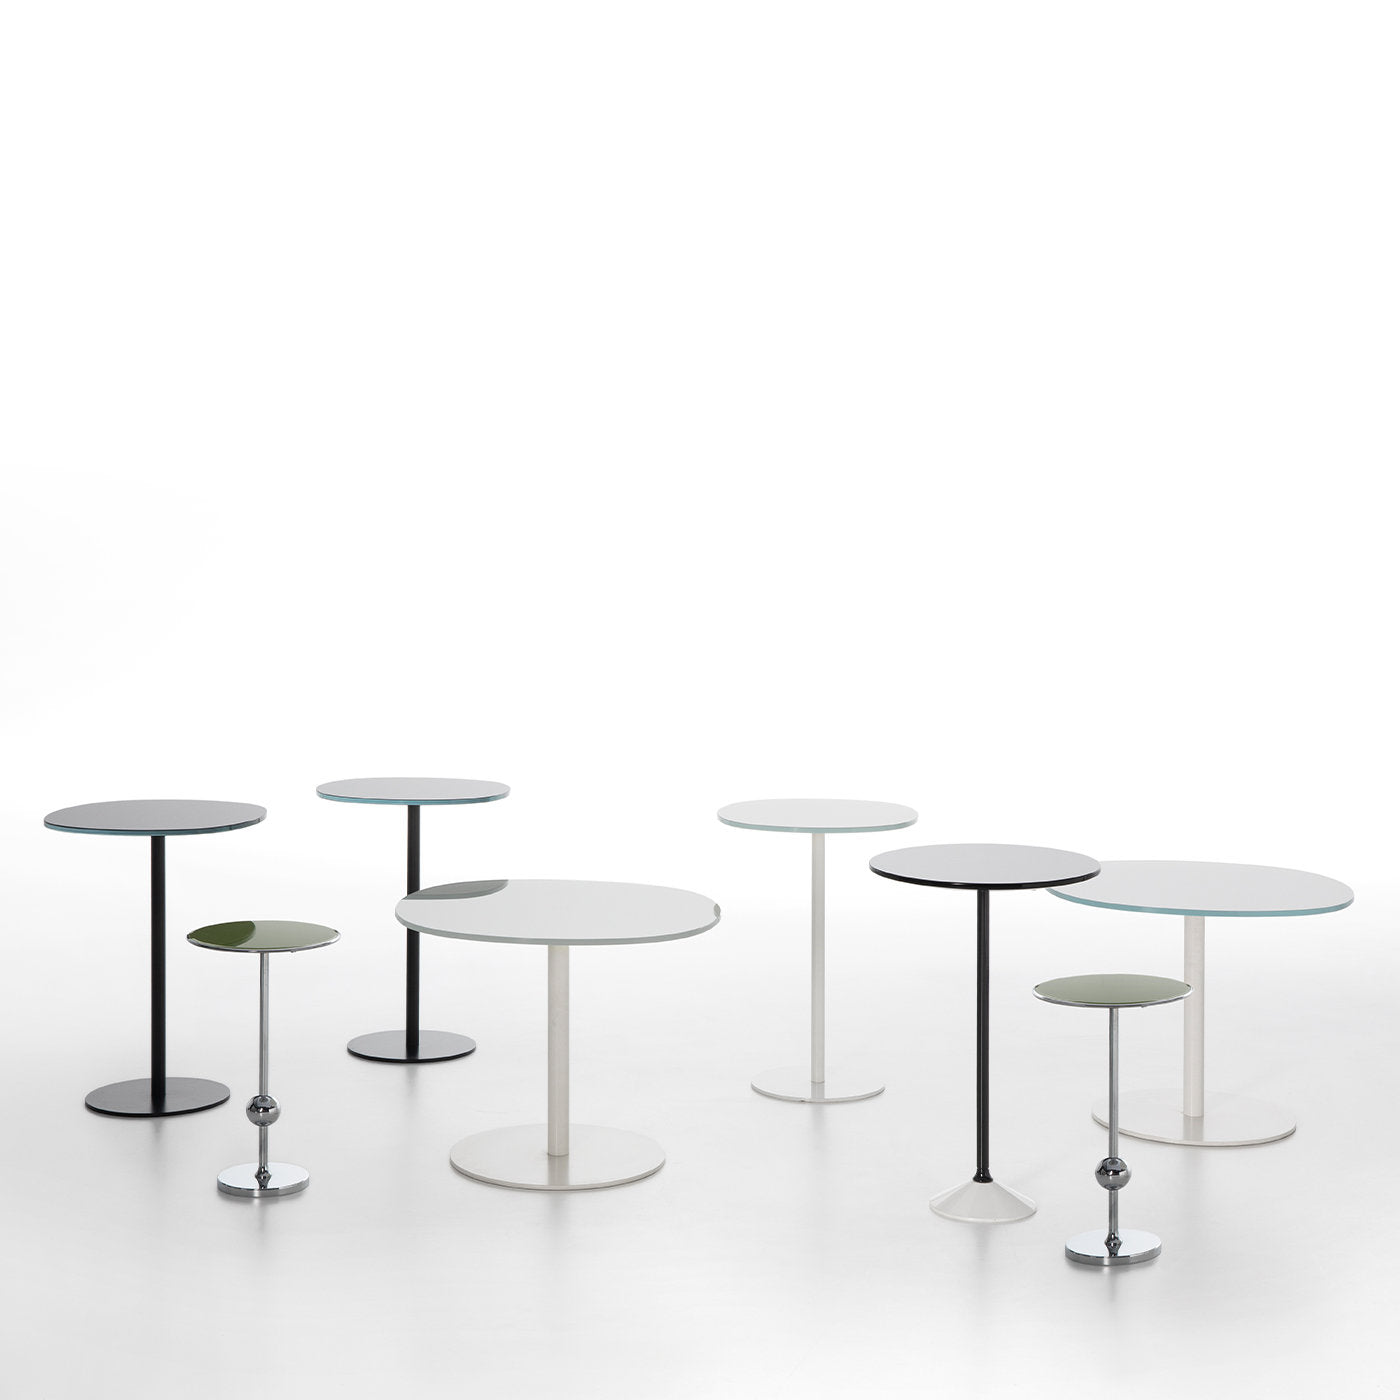 Solenoide White Low Side Table by Piero Lissoni - Alternative view 2